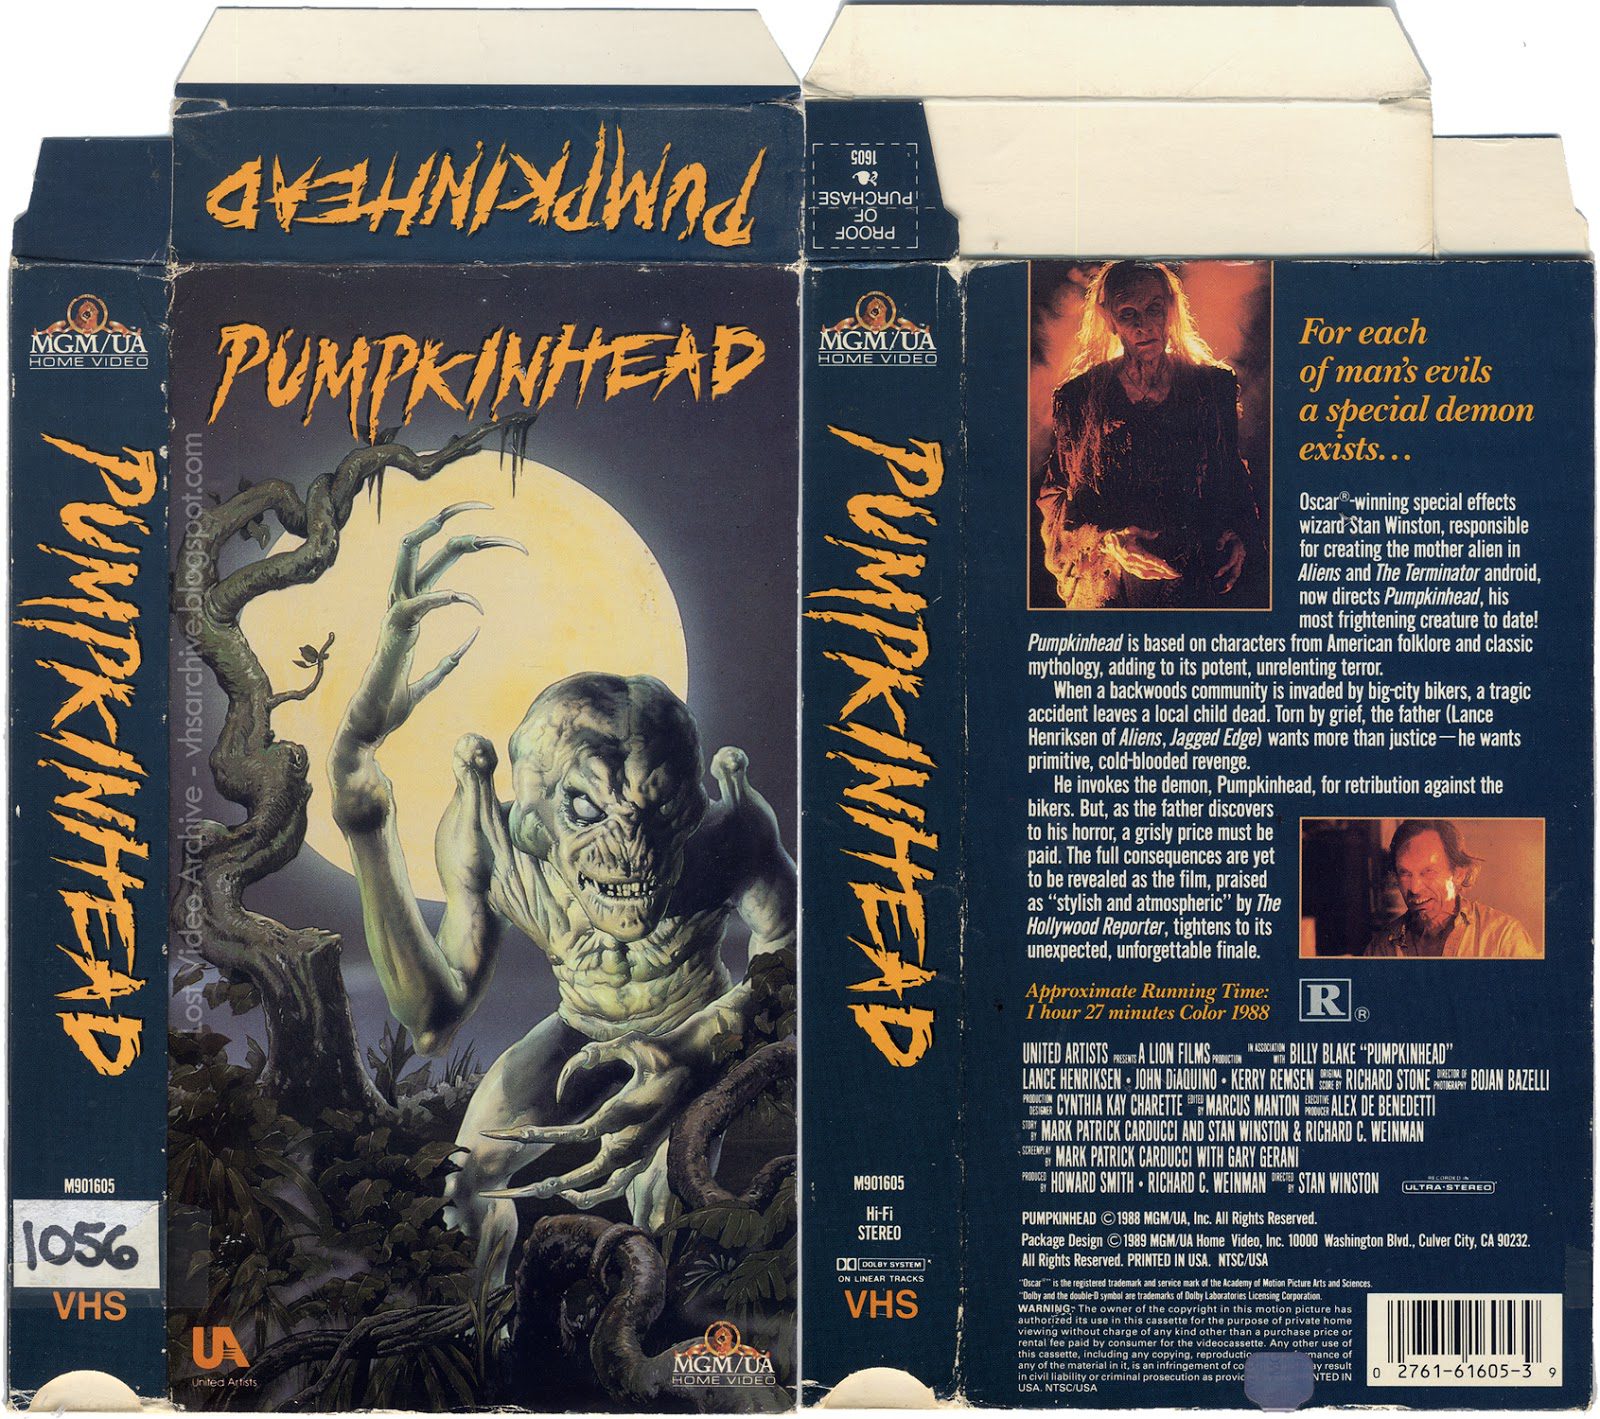 Why VHS Cover Art Stood Out so Well